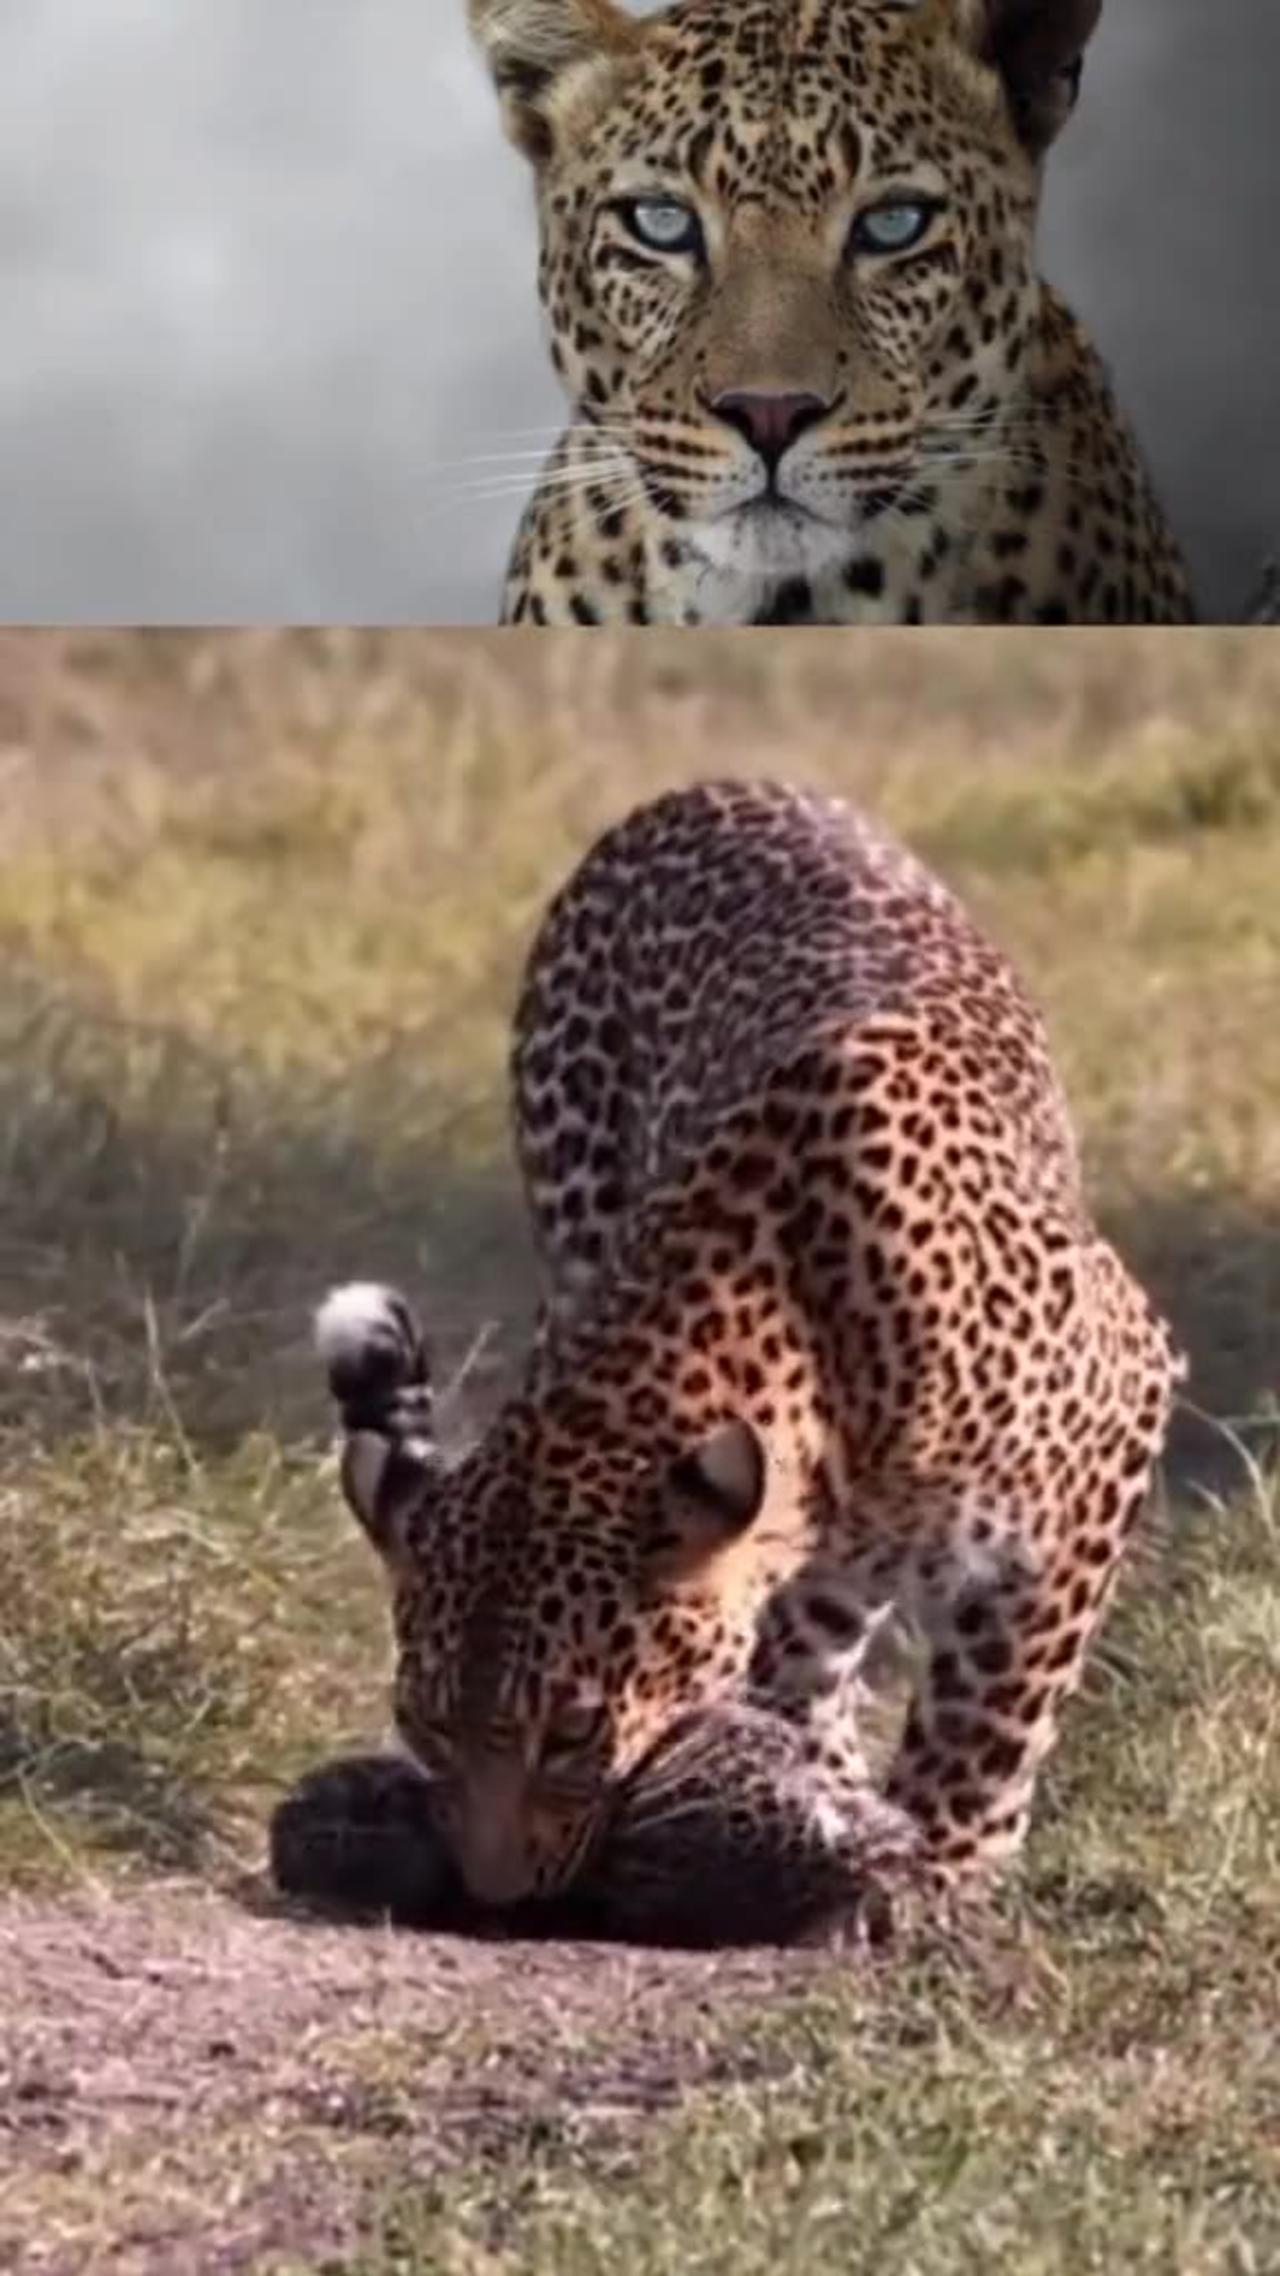 Lions attack leopard baby